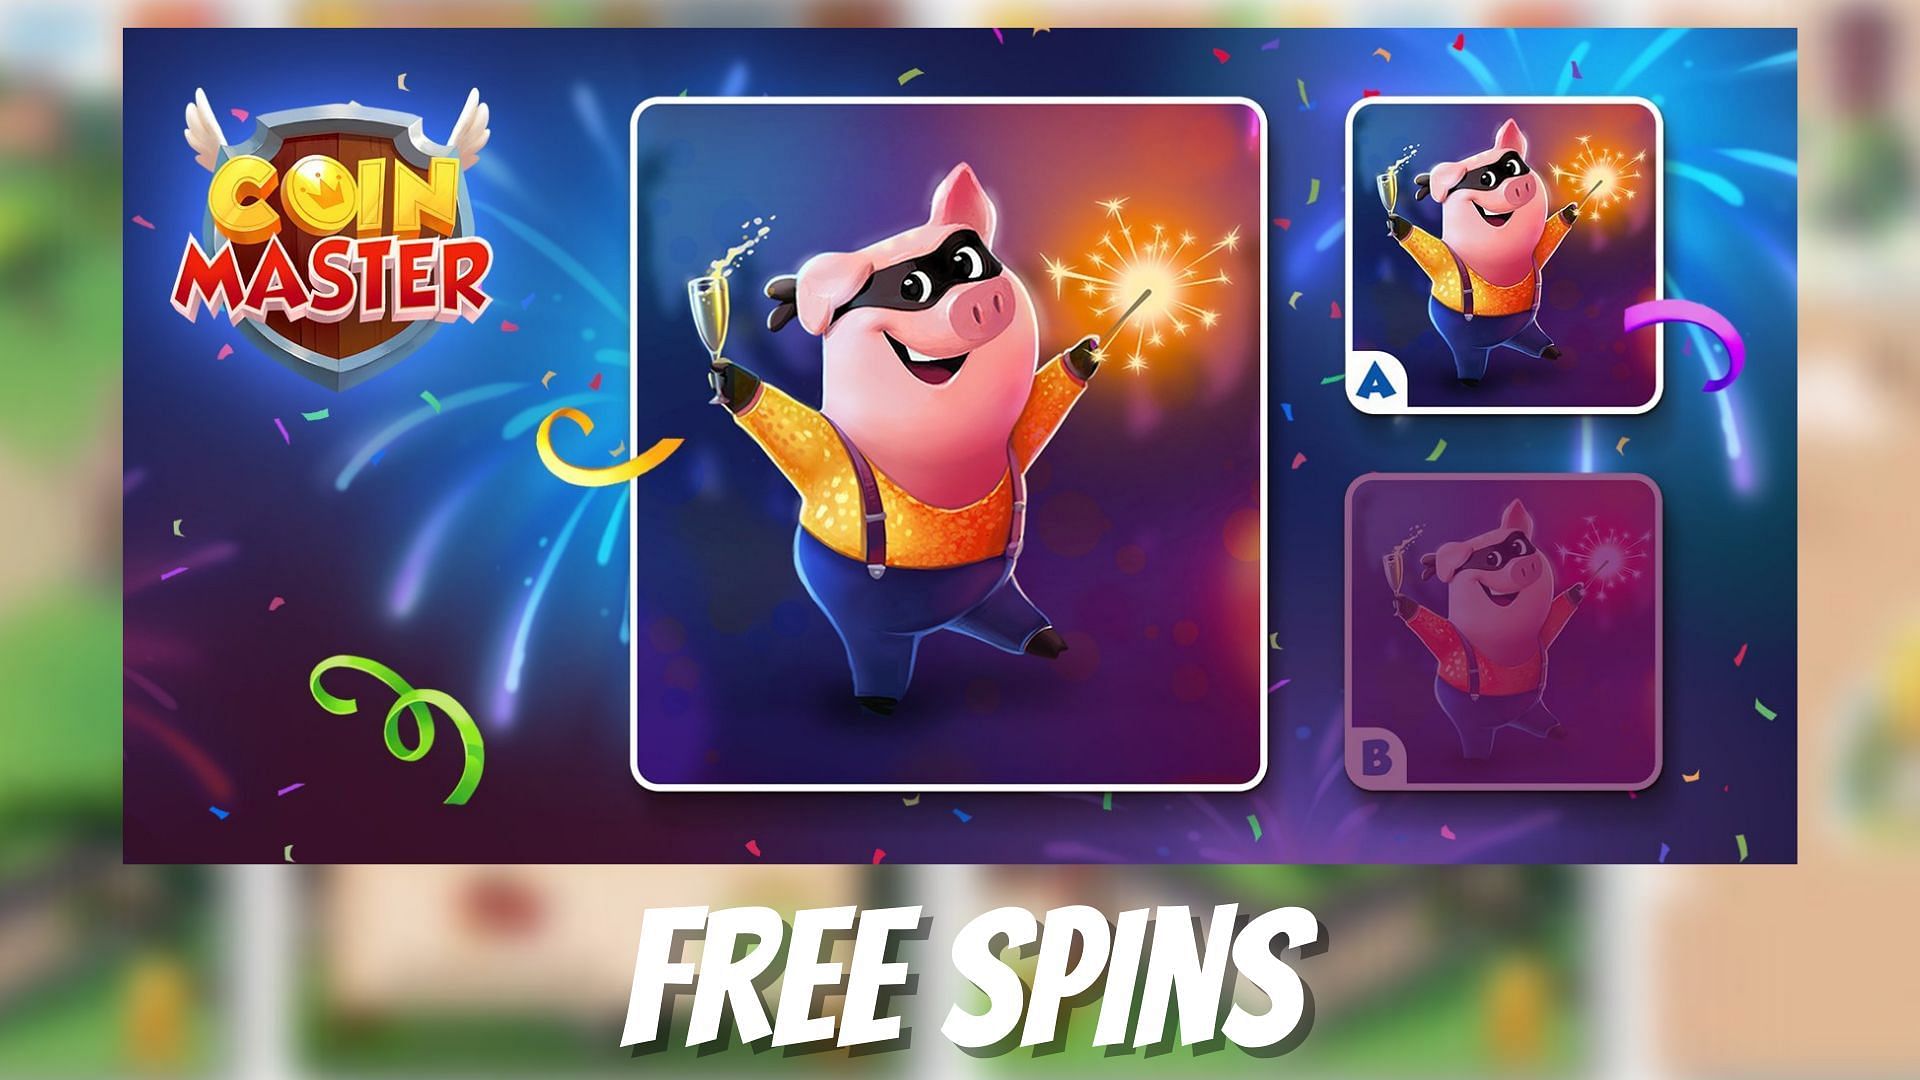 Reward links award players gold or free spins or some combination of the two (Image via Sportskeeda)